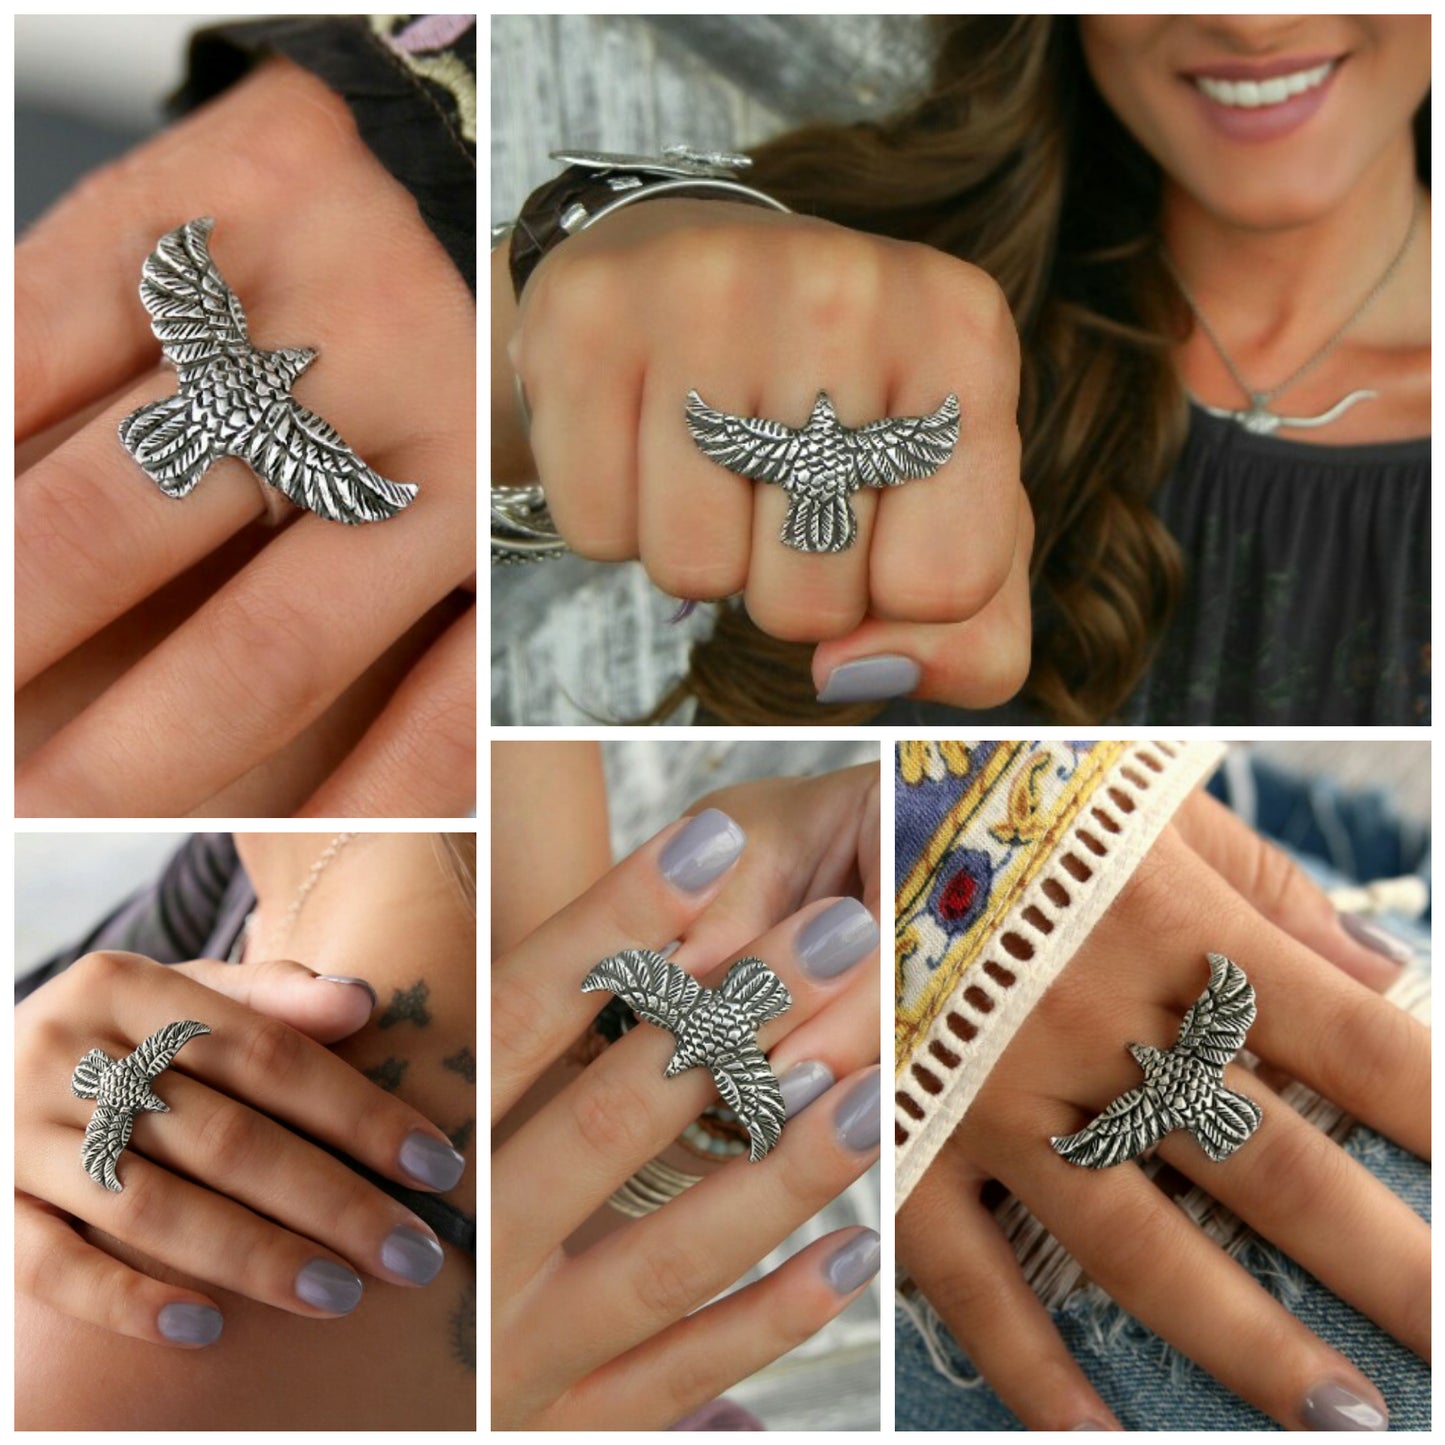 Silver Hippie Ring - HappyGoLicky Jewelry